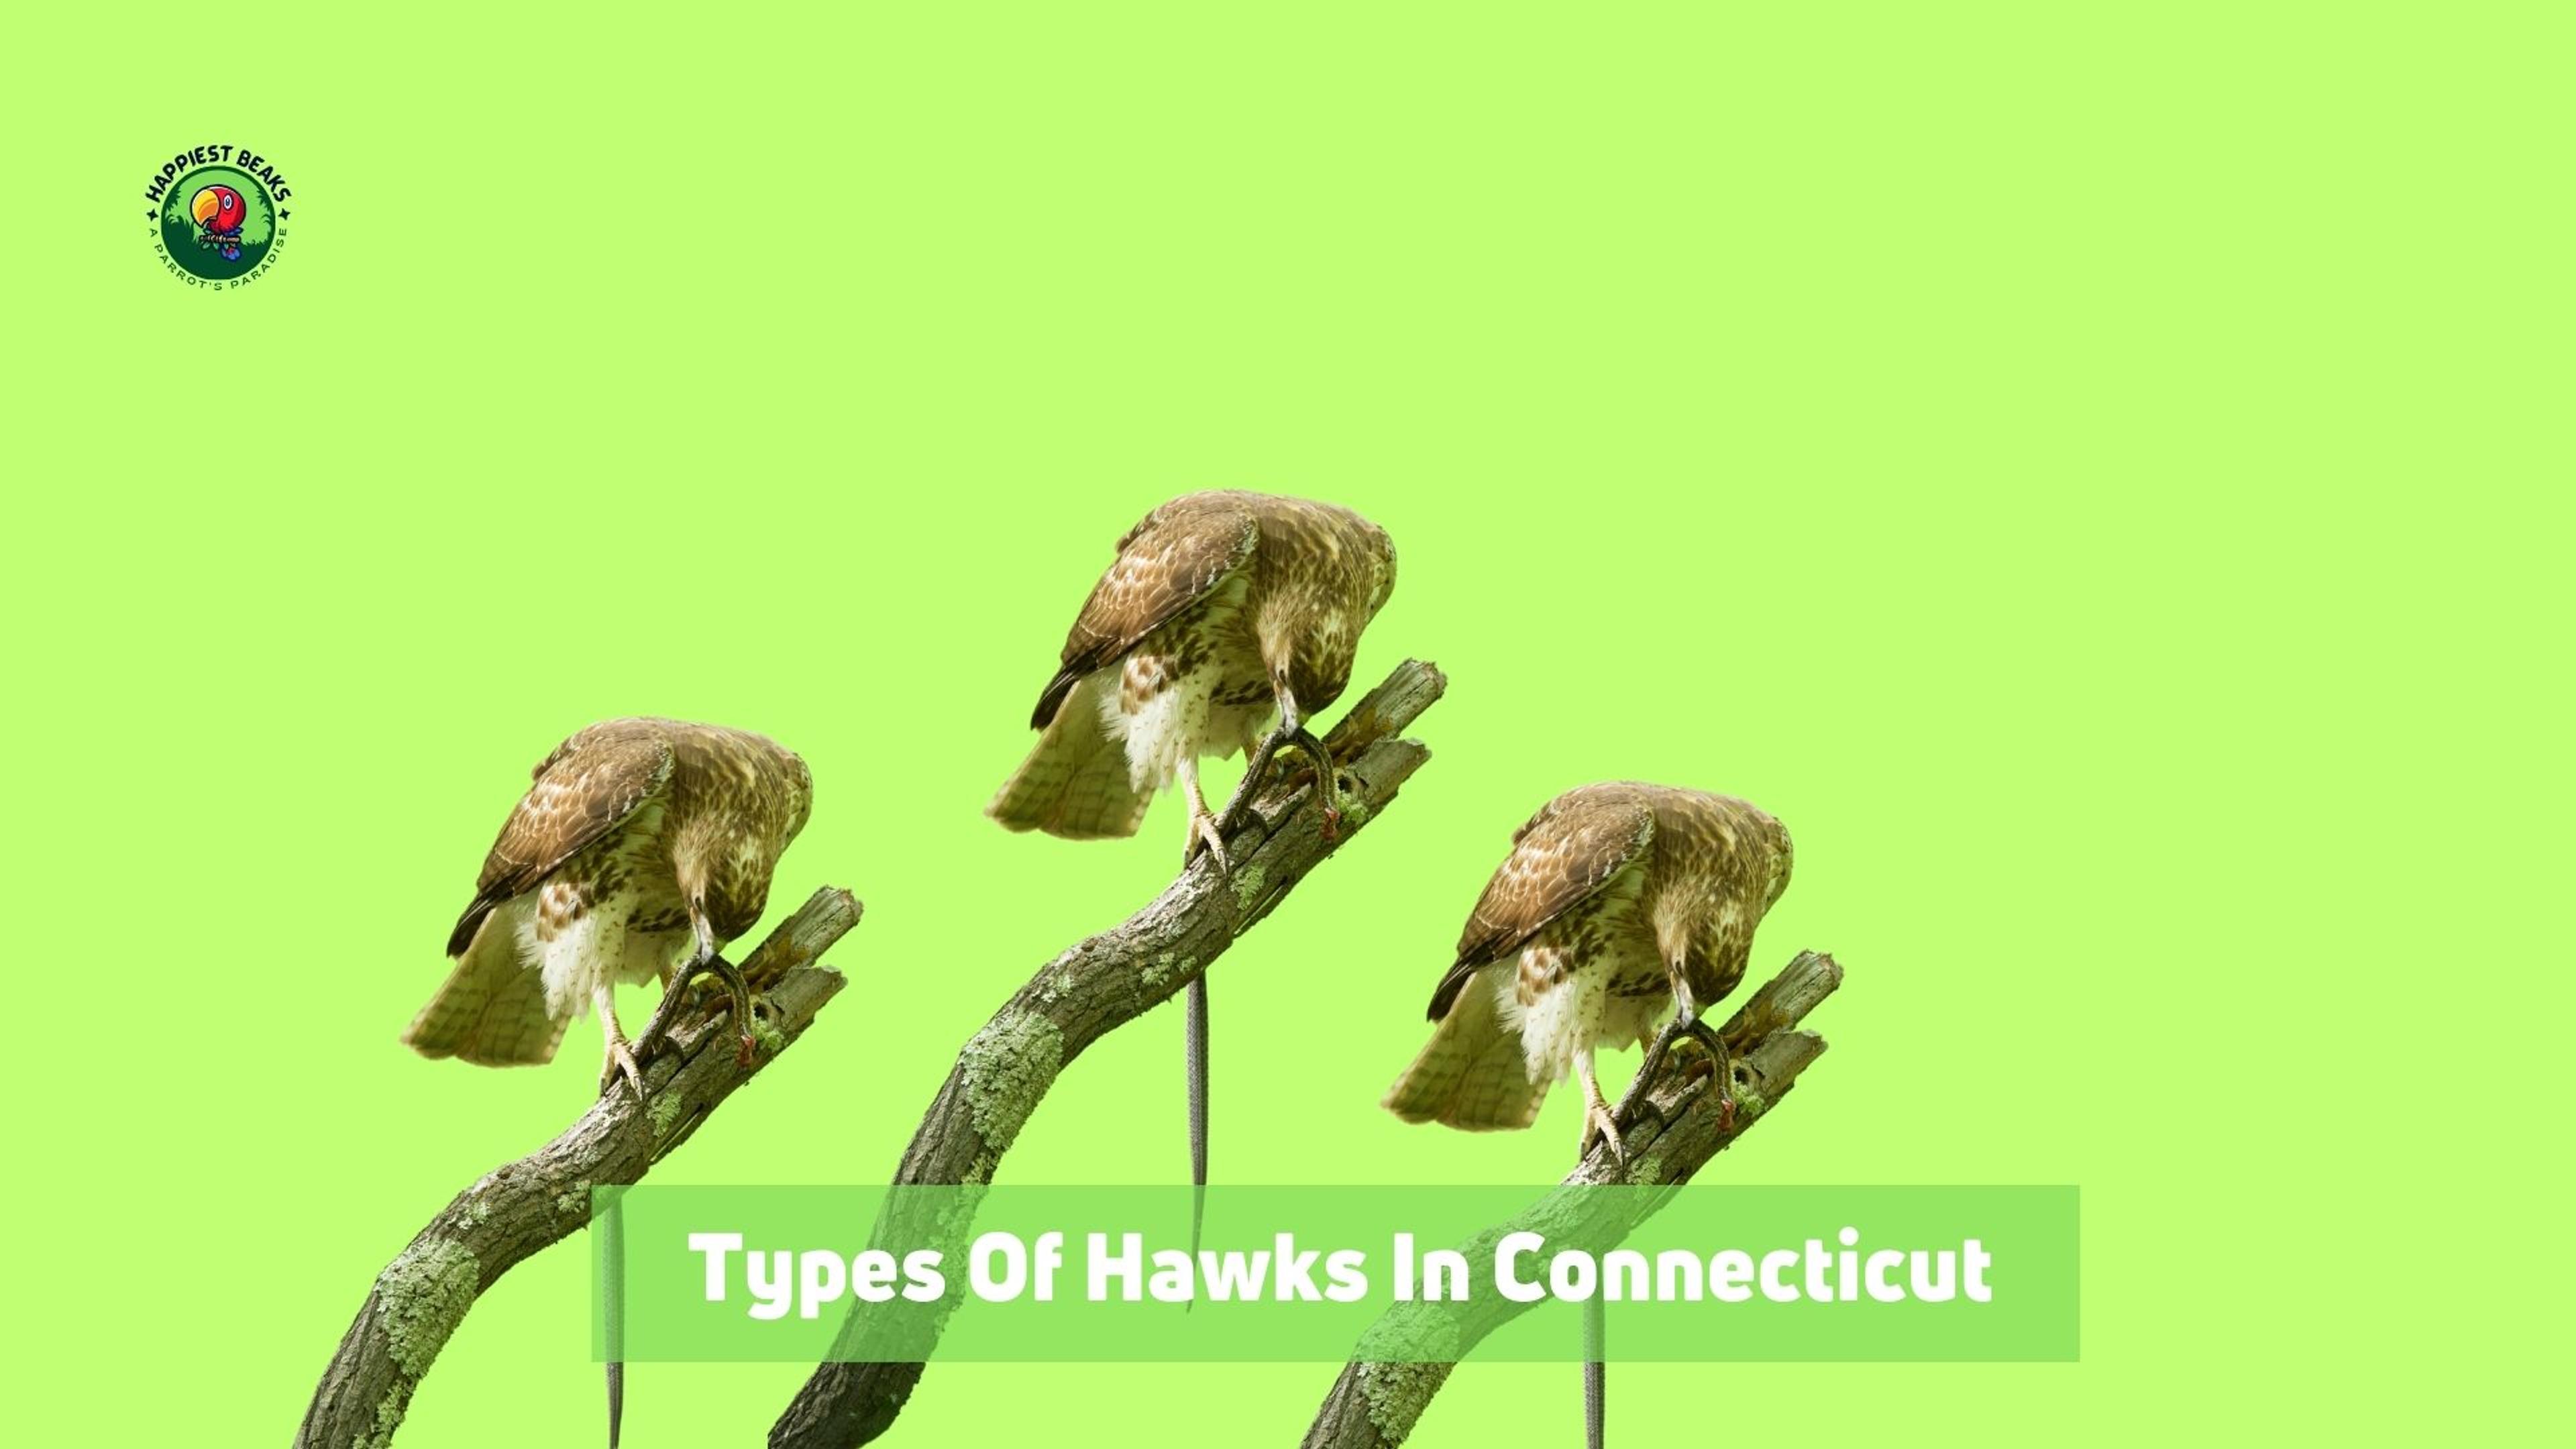 Types of Hawks in Connecticut